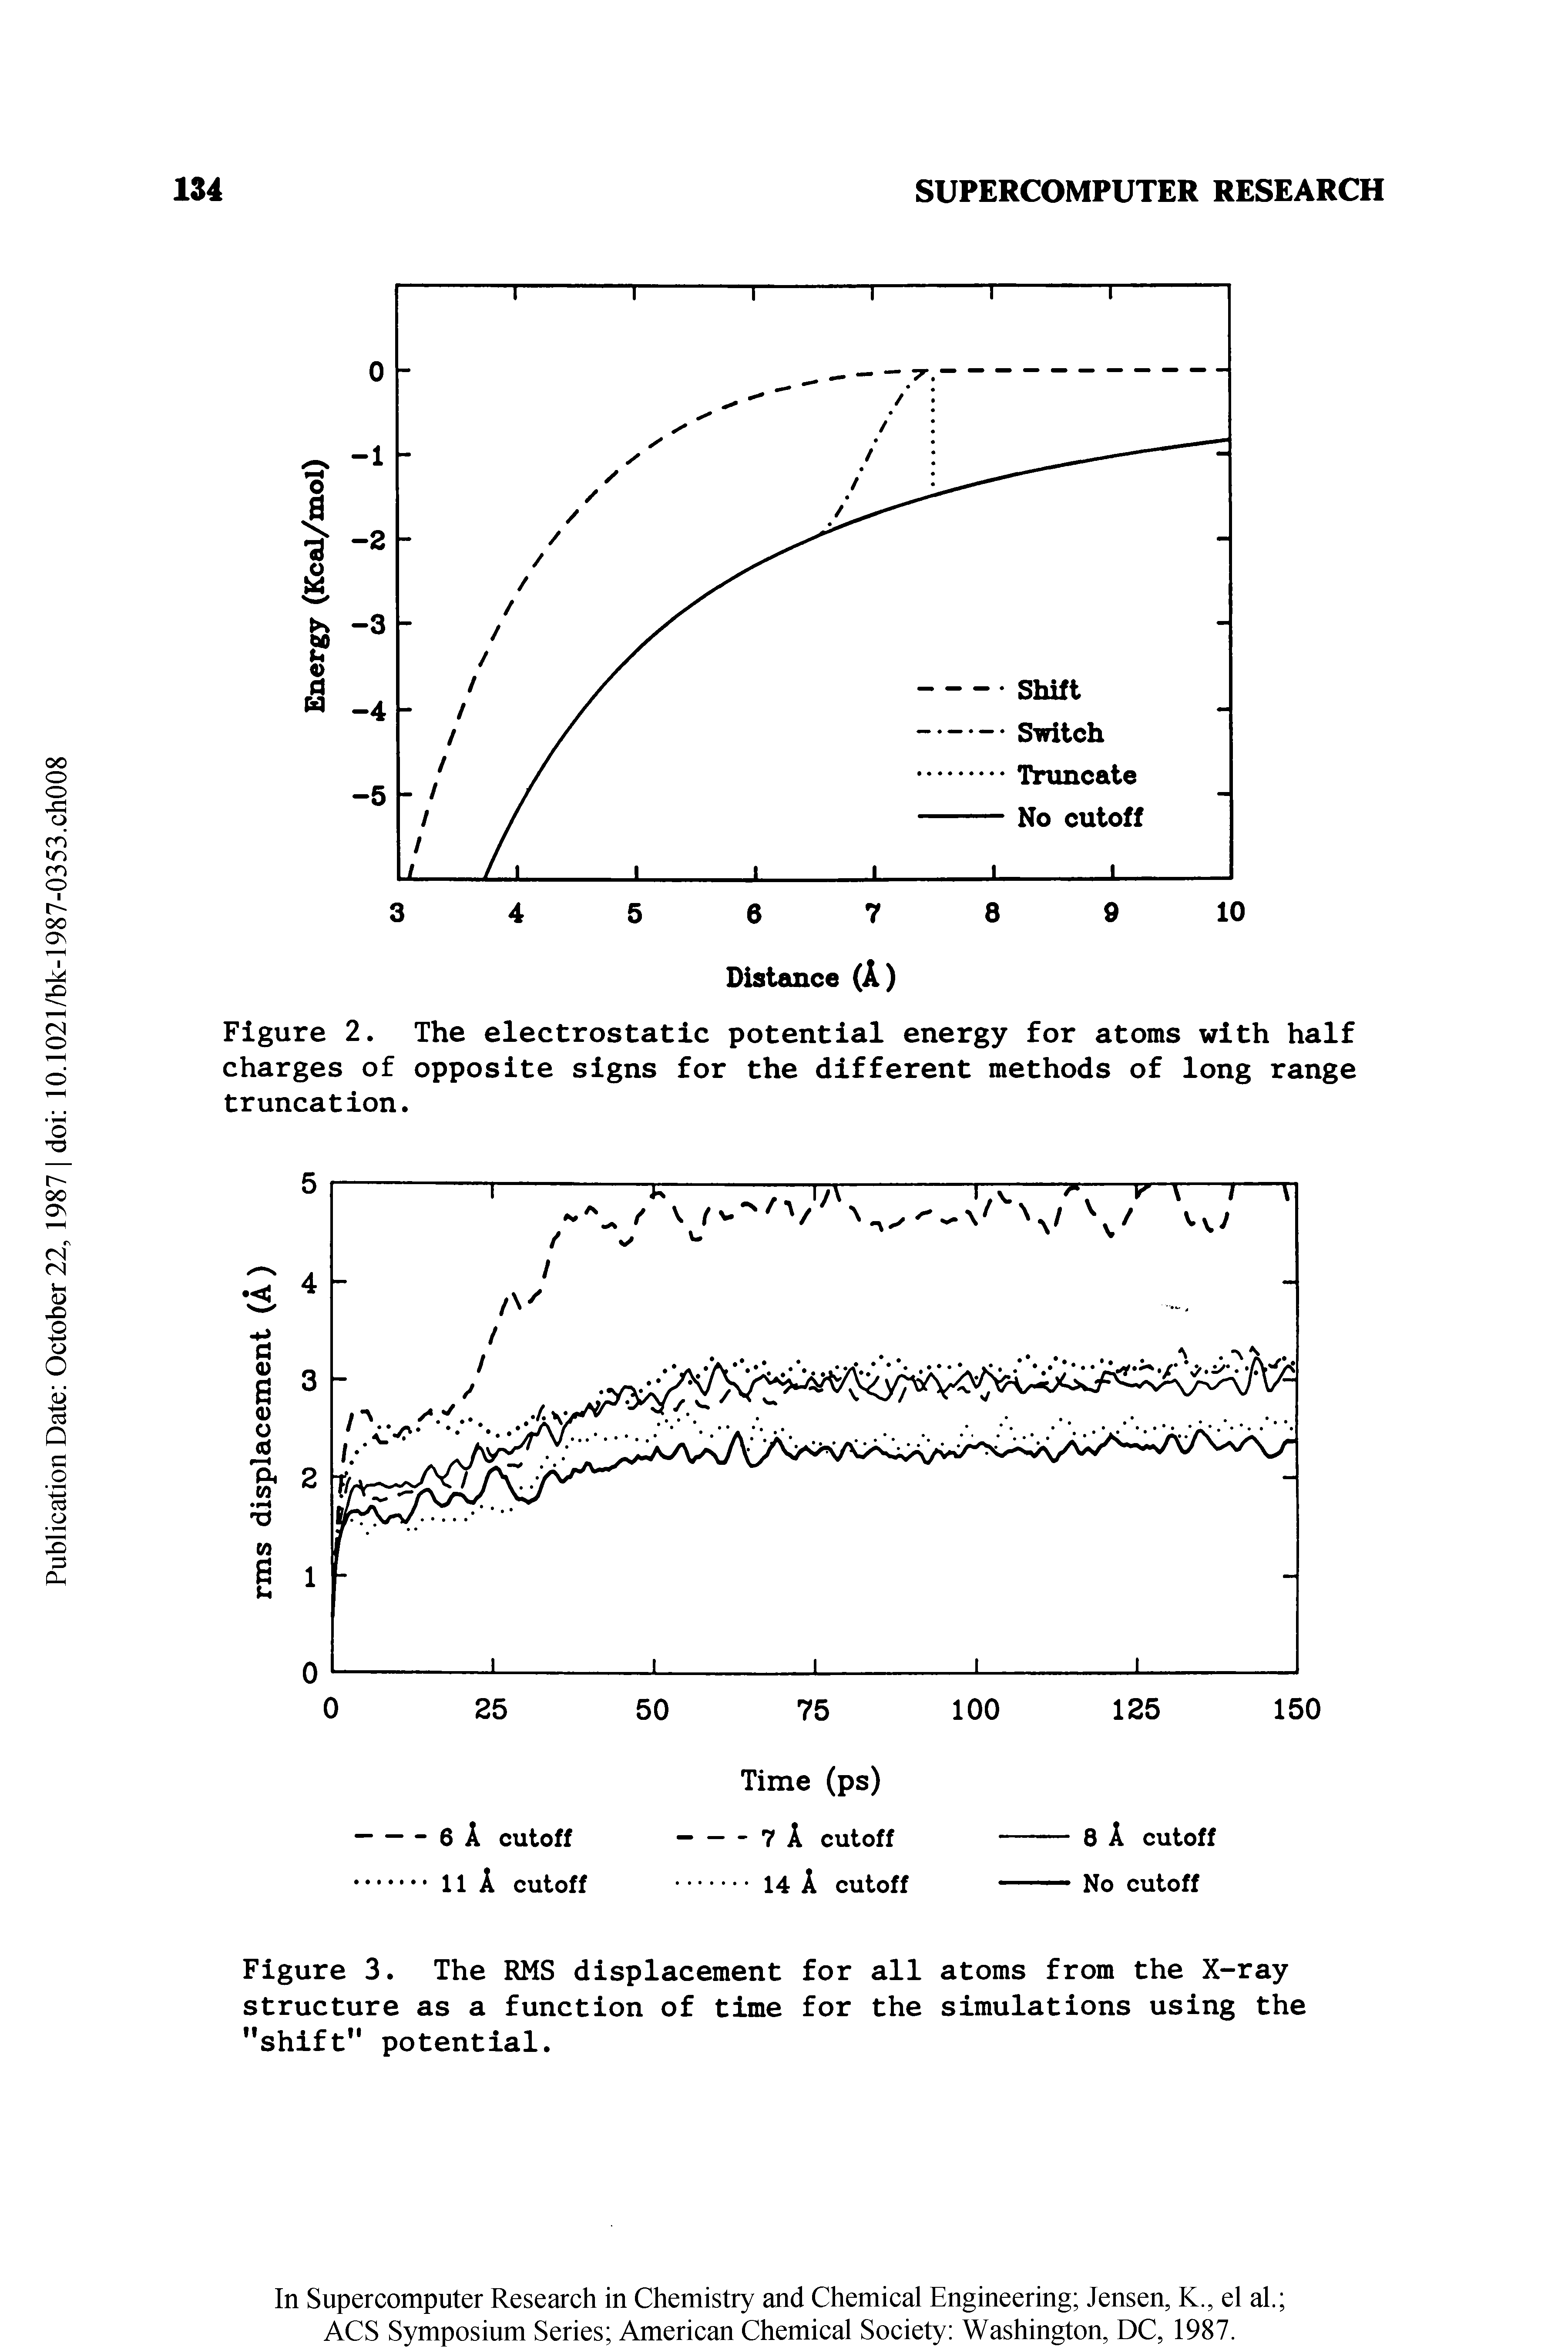 Figure 2. The electrostatic potential energy for atoms with half charges of opposite signs for the different methods of long range truncation.